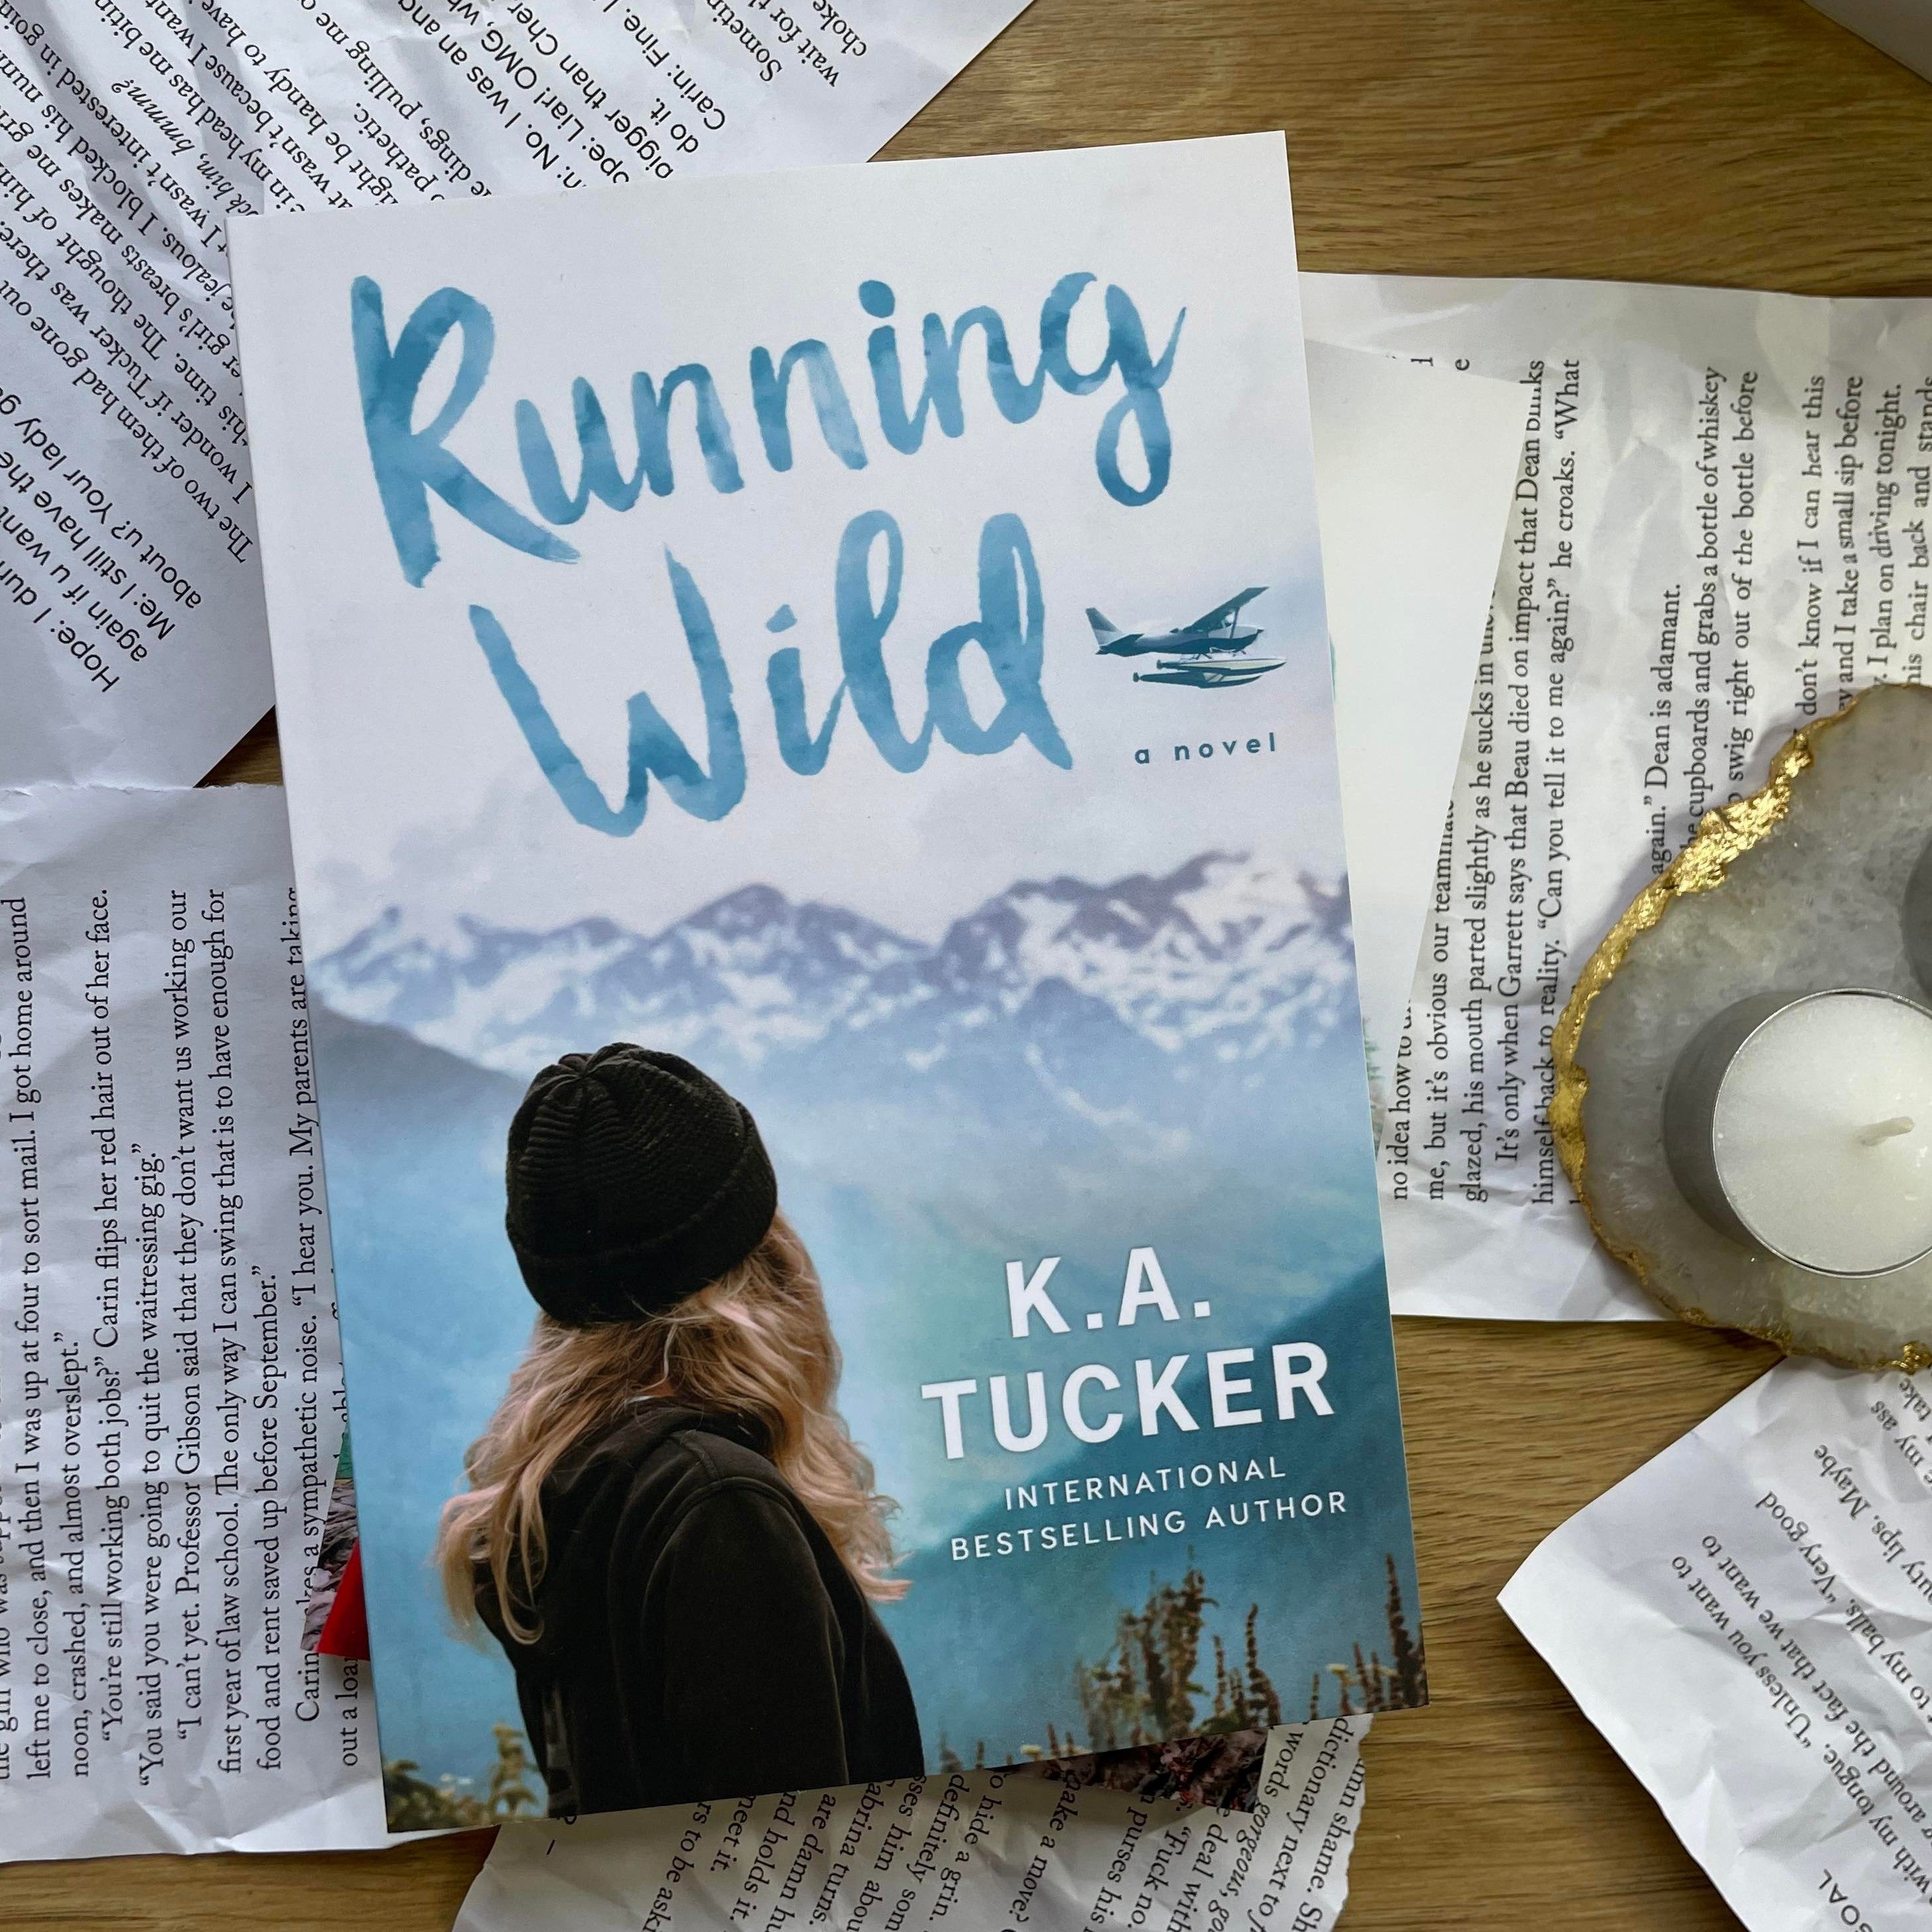 The Simple Wild by K. A. Tucker